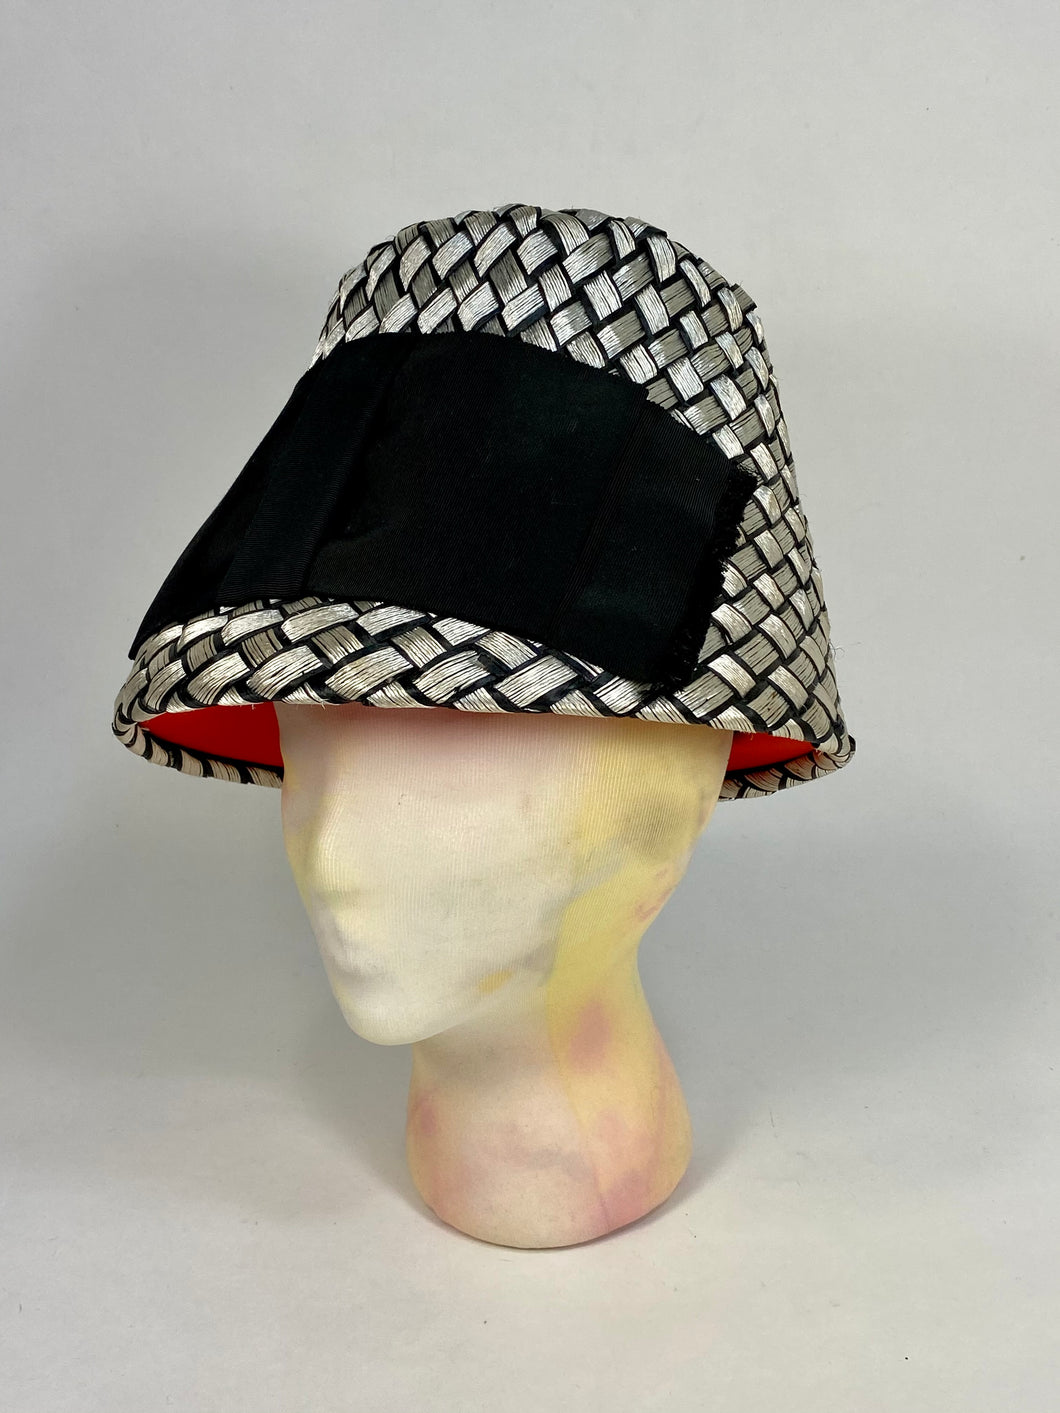 1960's 60s Silver & Black straw 'bucket' style hat by LESLIE JAMES + original hat box